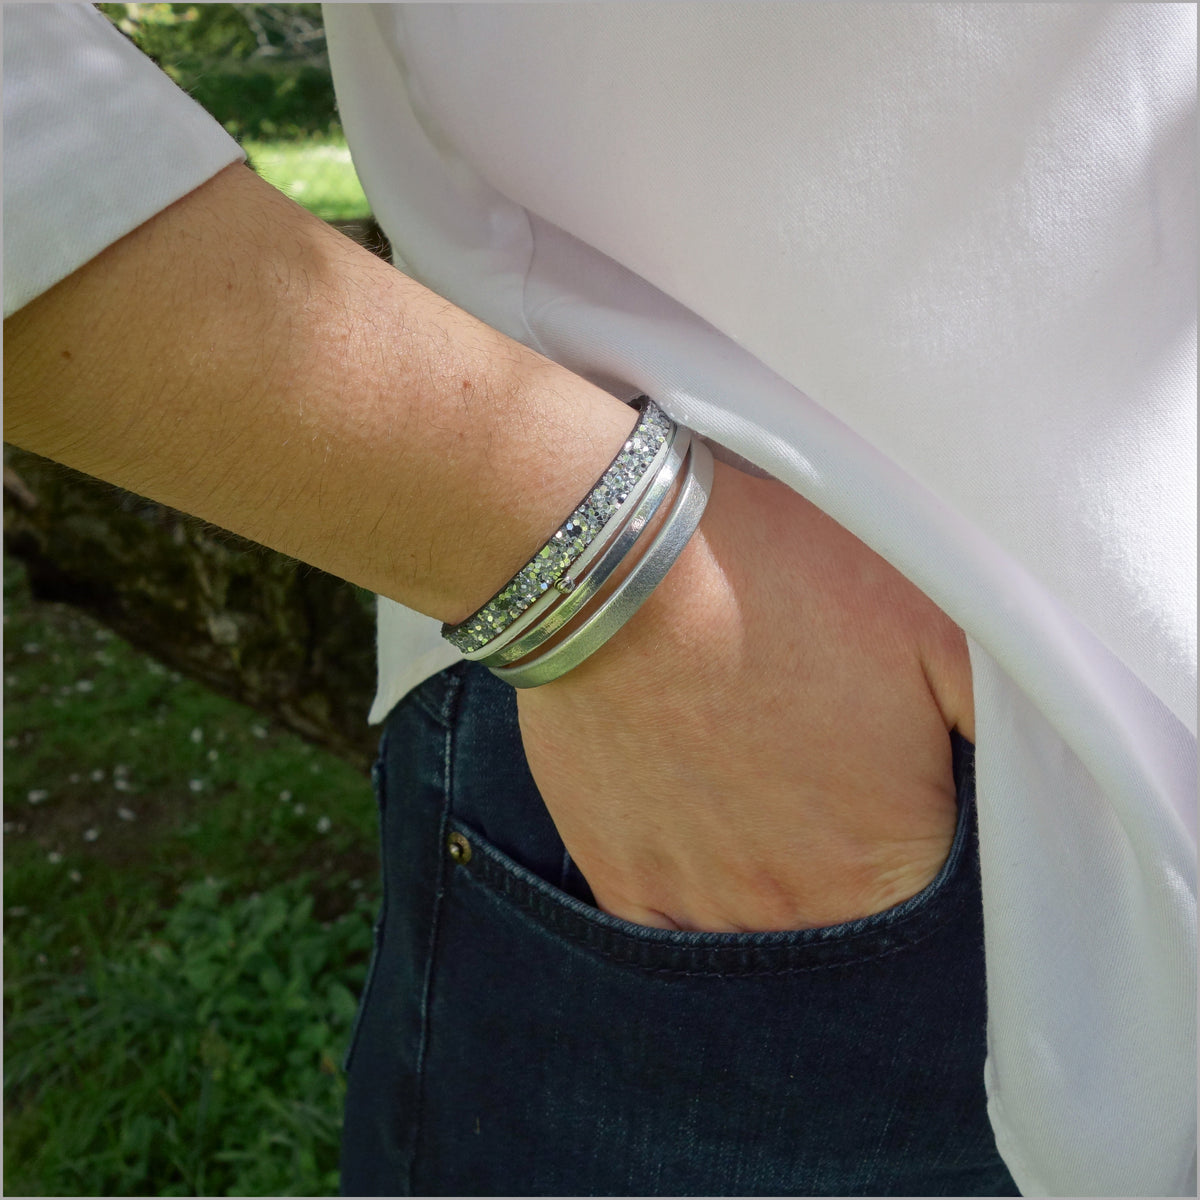 Multi-link bracelet in gold and silver leather